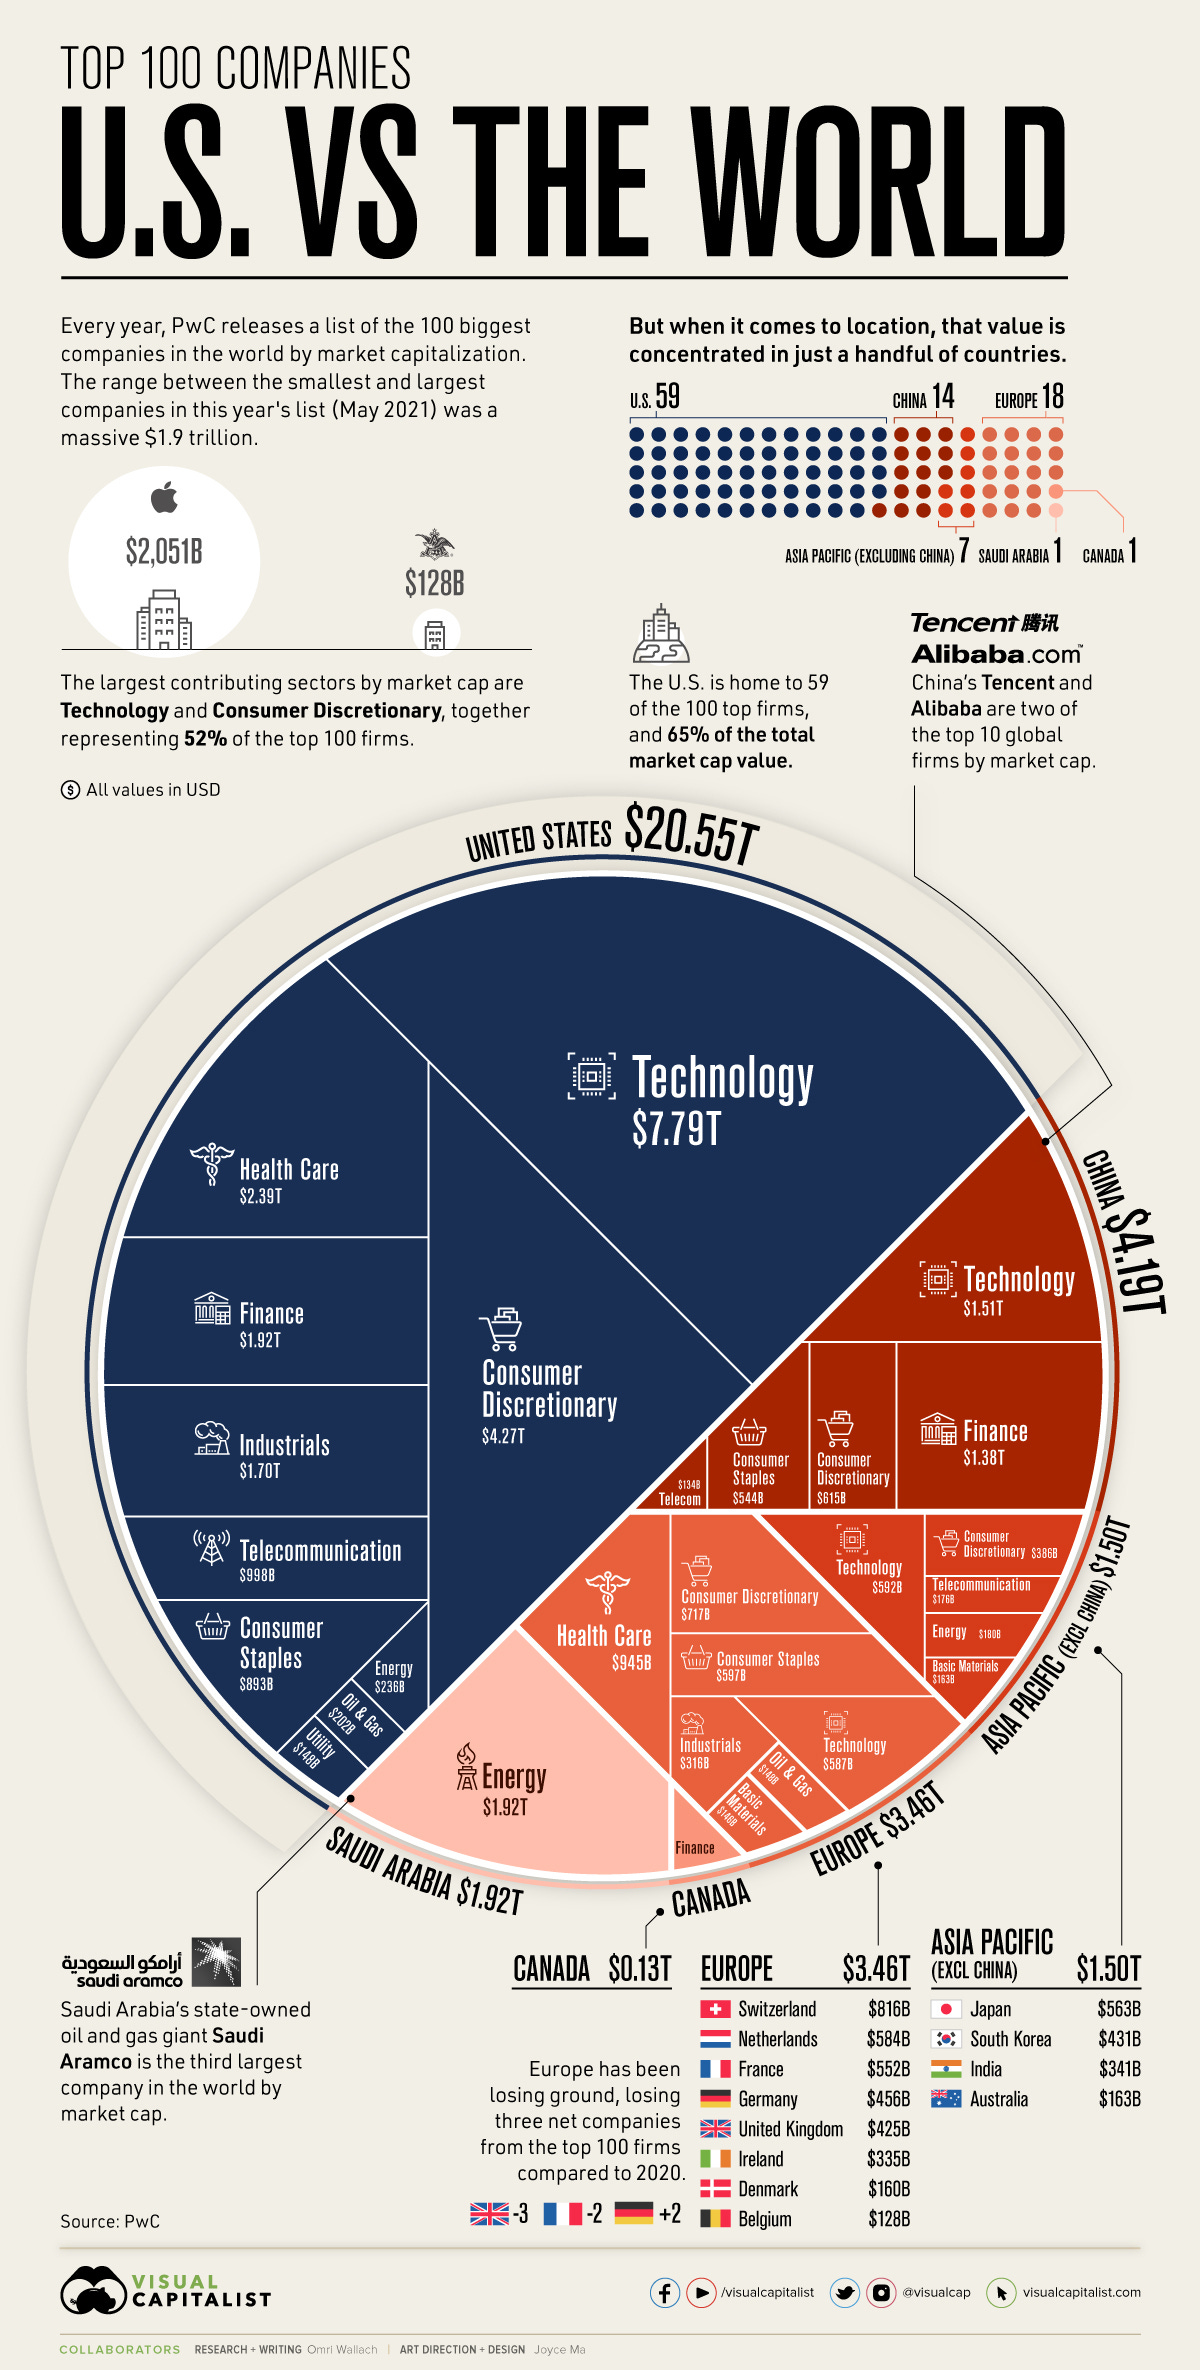 Top 100 Companies of the World vs US